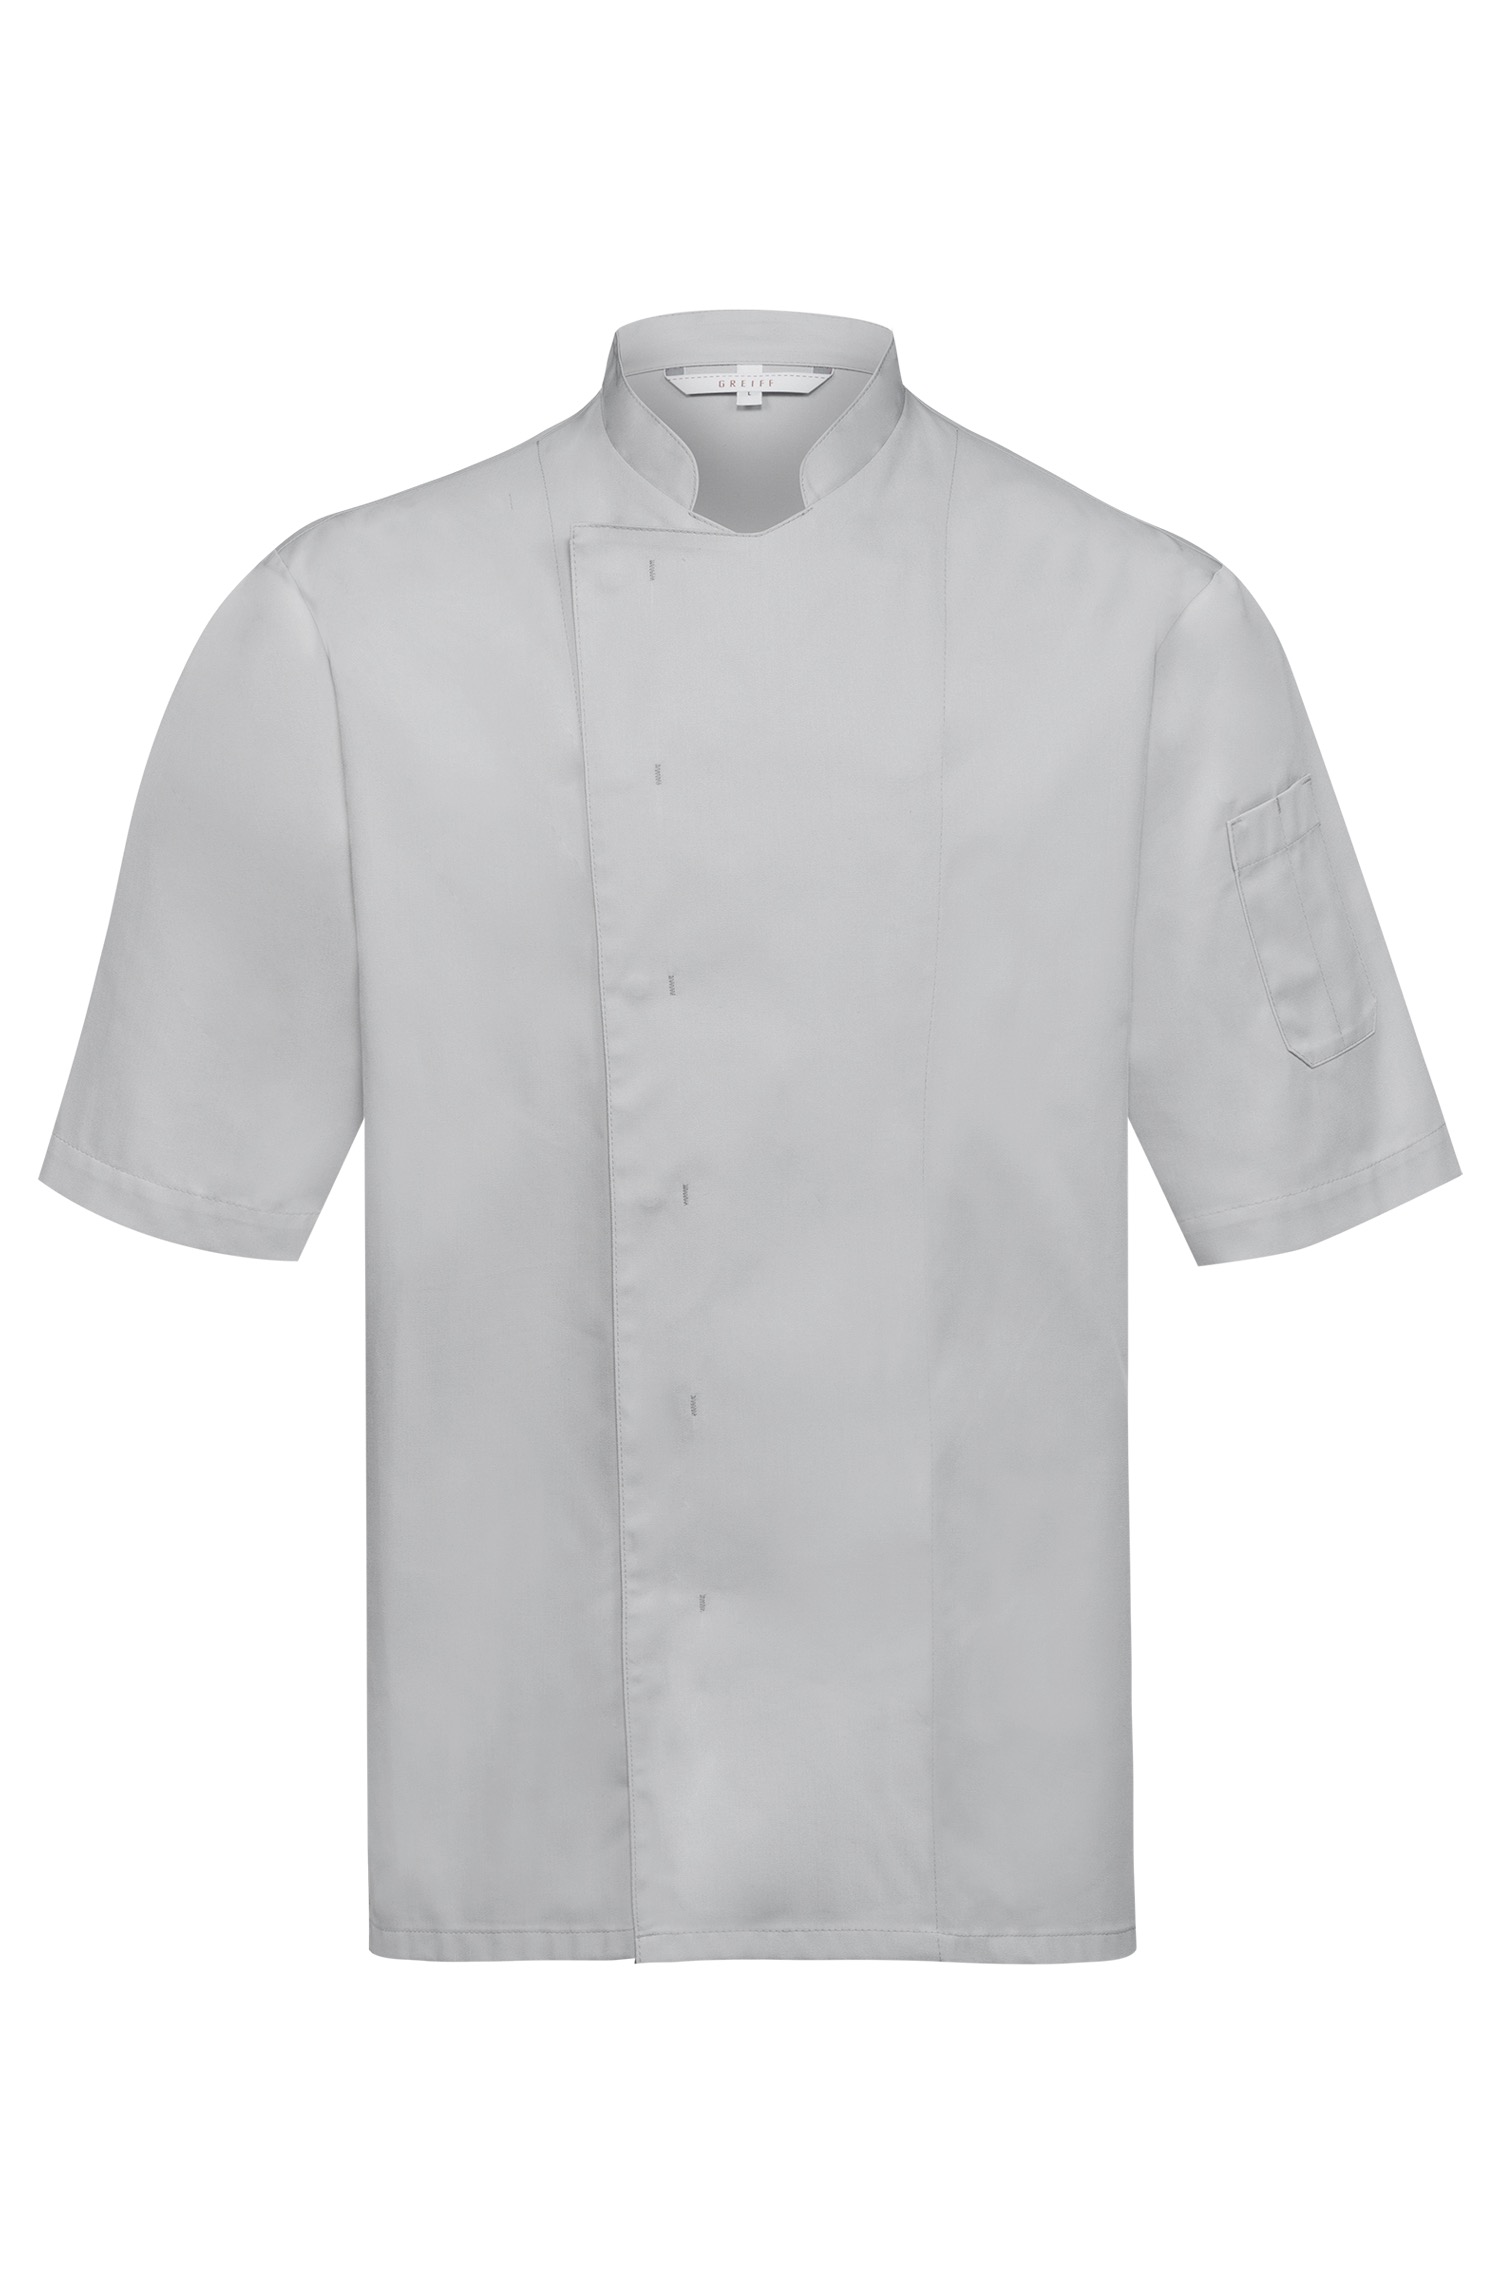 Men's chef's jacket short sleeve with concealed press studs Greiff® light gray 4XL